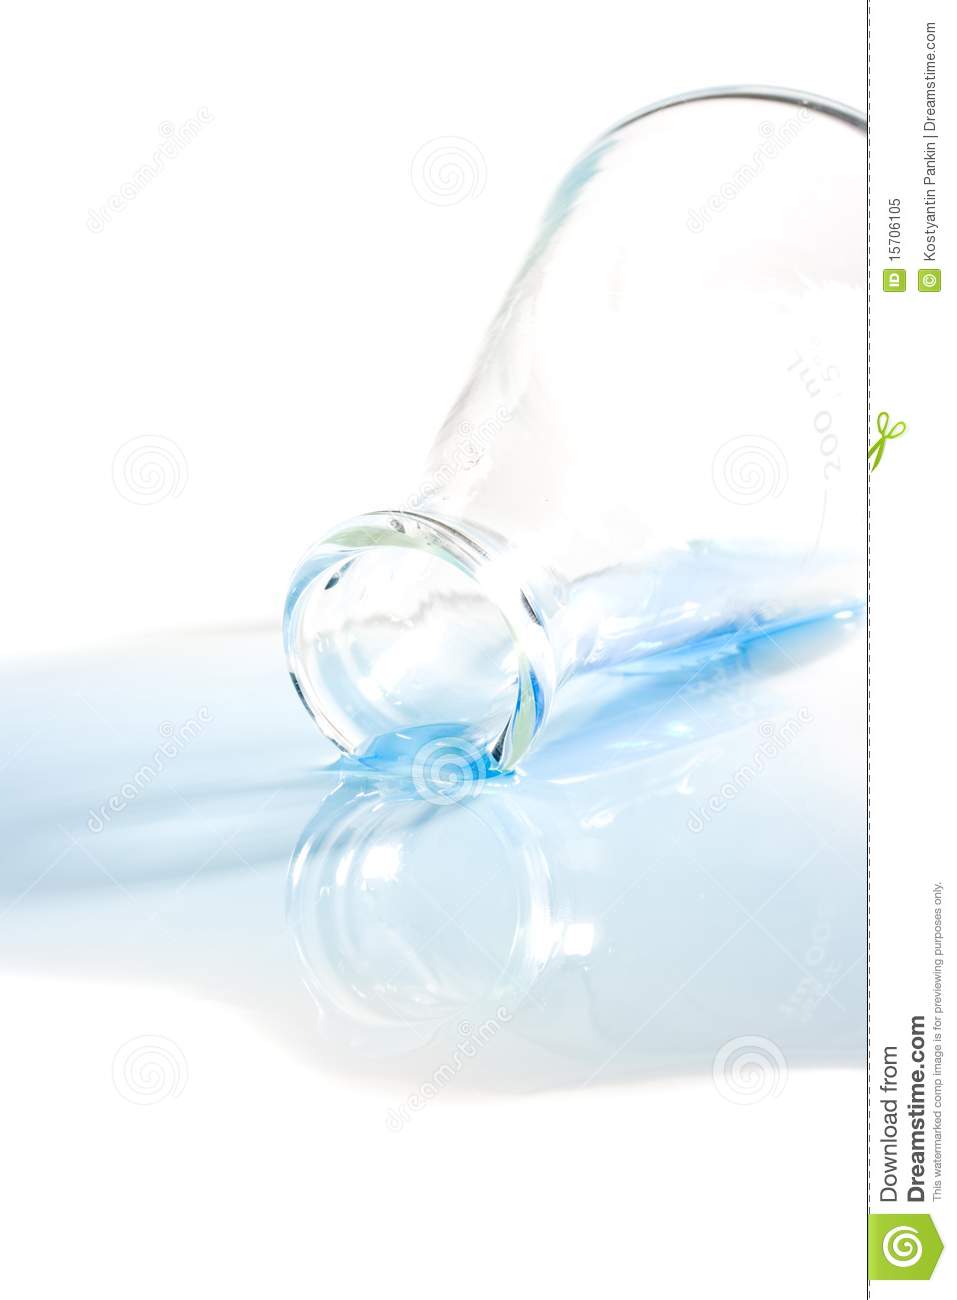 Blue Liquid Spilled From An Erlenmeyer Flask On A White Background 